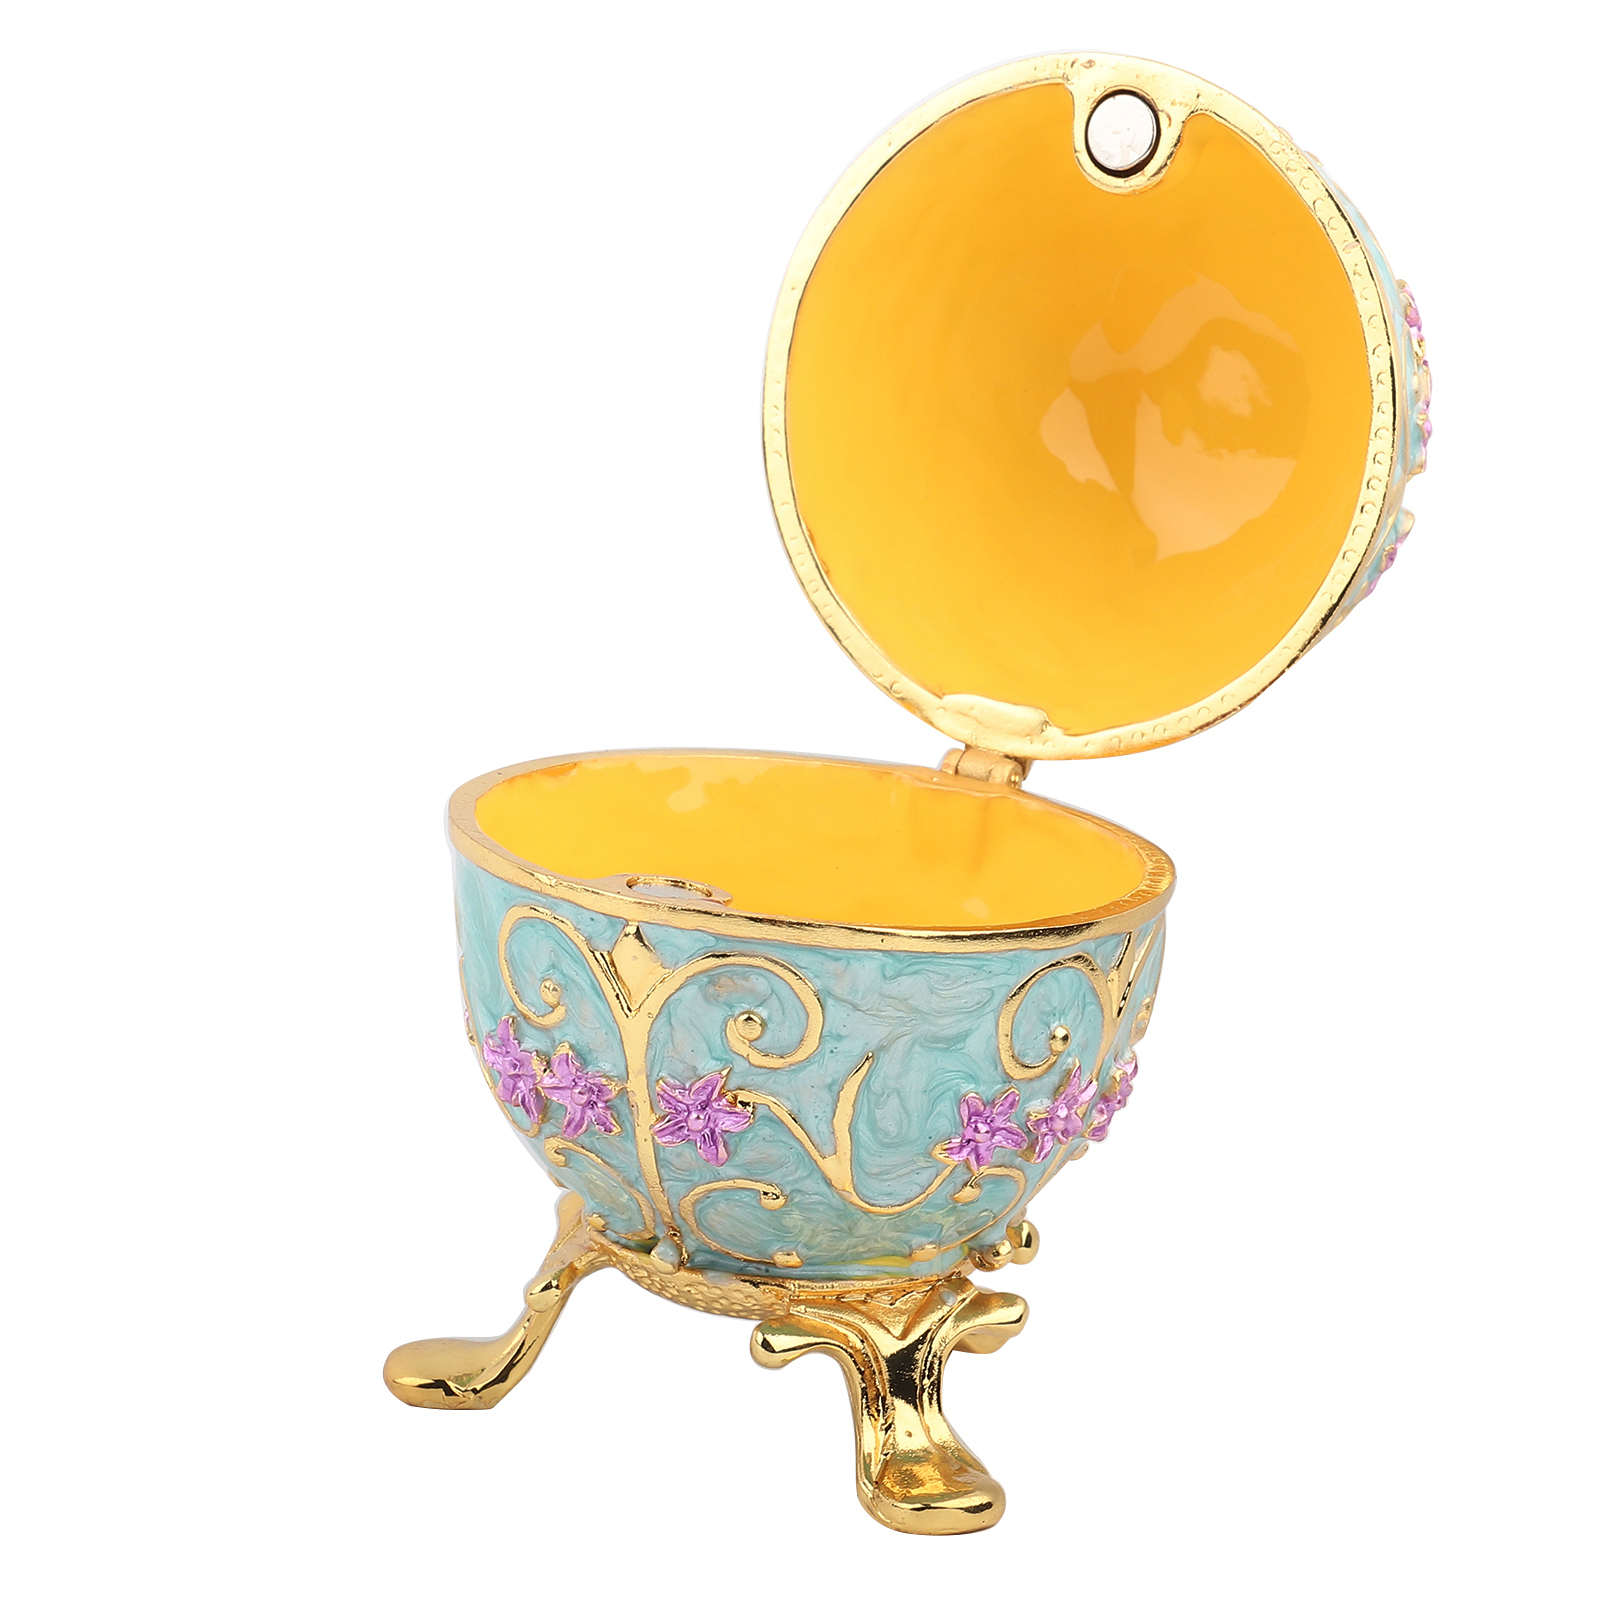 Faberge Egg, Decorative Hand-made Enameled Easter Egg Box, Metal For Women Home Ornaments Desktop Decor Gifts - image 5 of 8